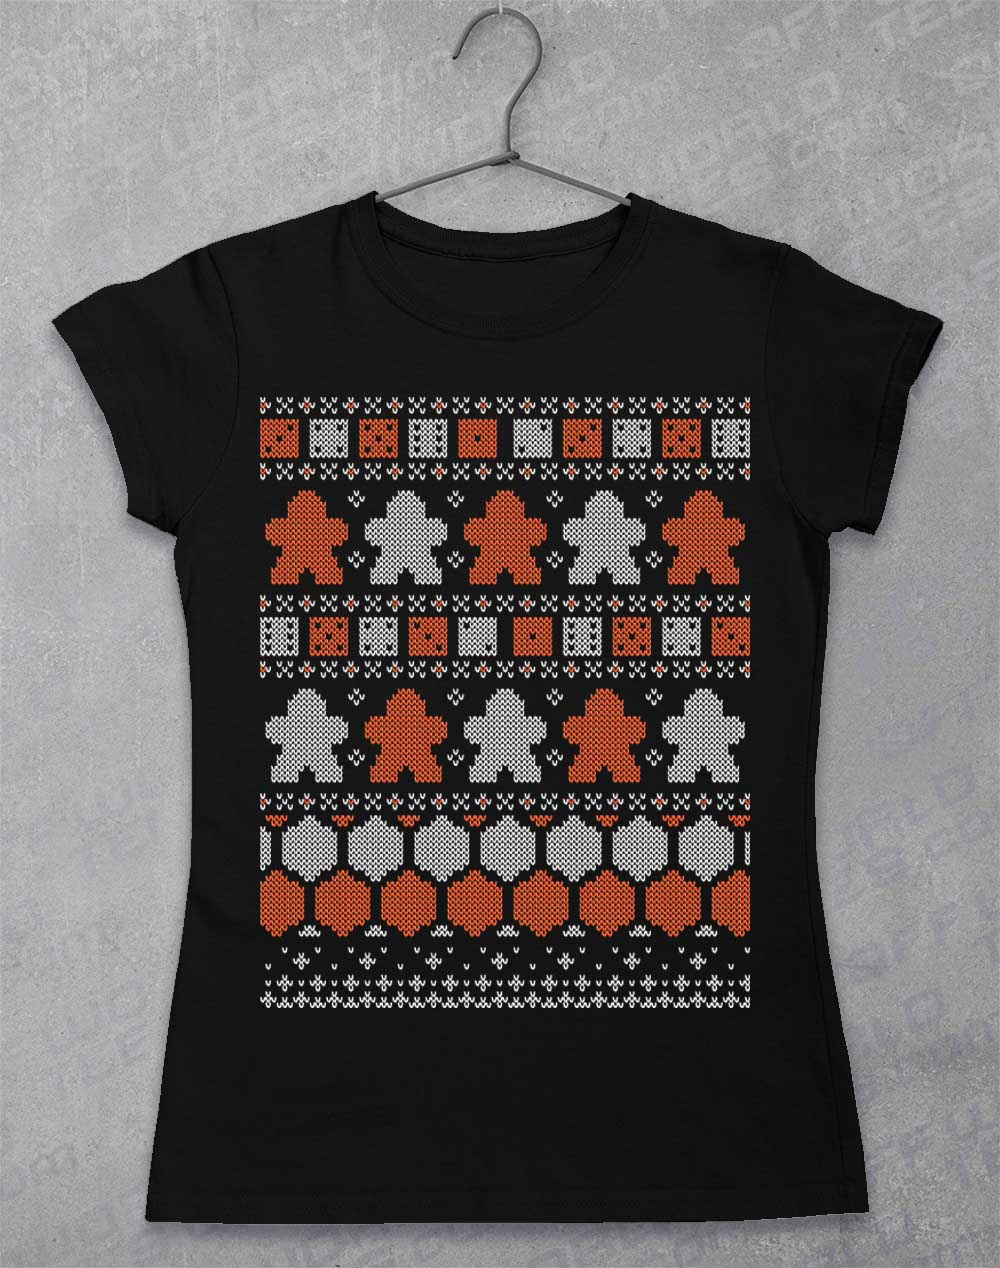 Black - Board Game Pieces Christmas Knit-Look Women's T-Shirt